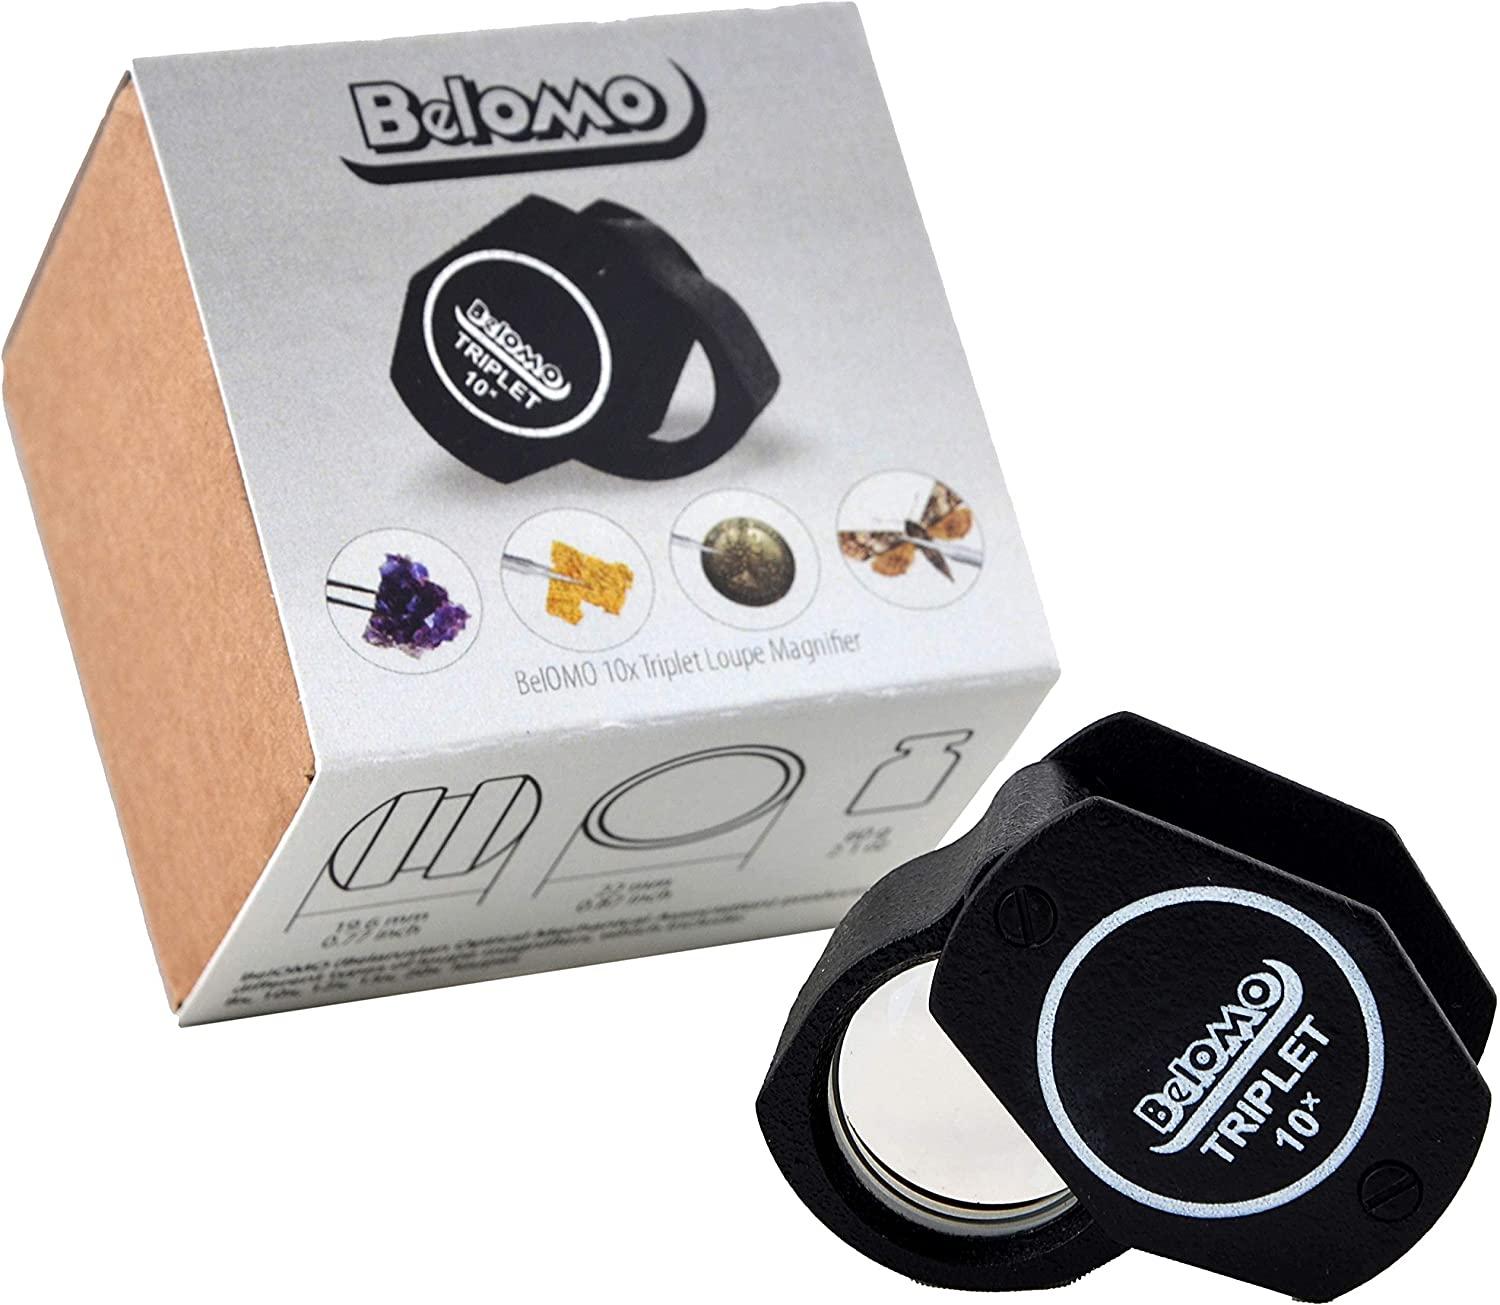 BelOMO Jewelers Loupe 10x Triplet Magnifier 21mm (.85). Optical Glass with  Anti-Reflection Coating for a Bright, Clear and Color Correct View.  Foldable Loupe for Gems, Jewelry, Coins and Trichomes